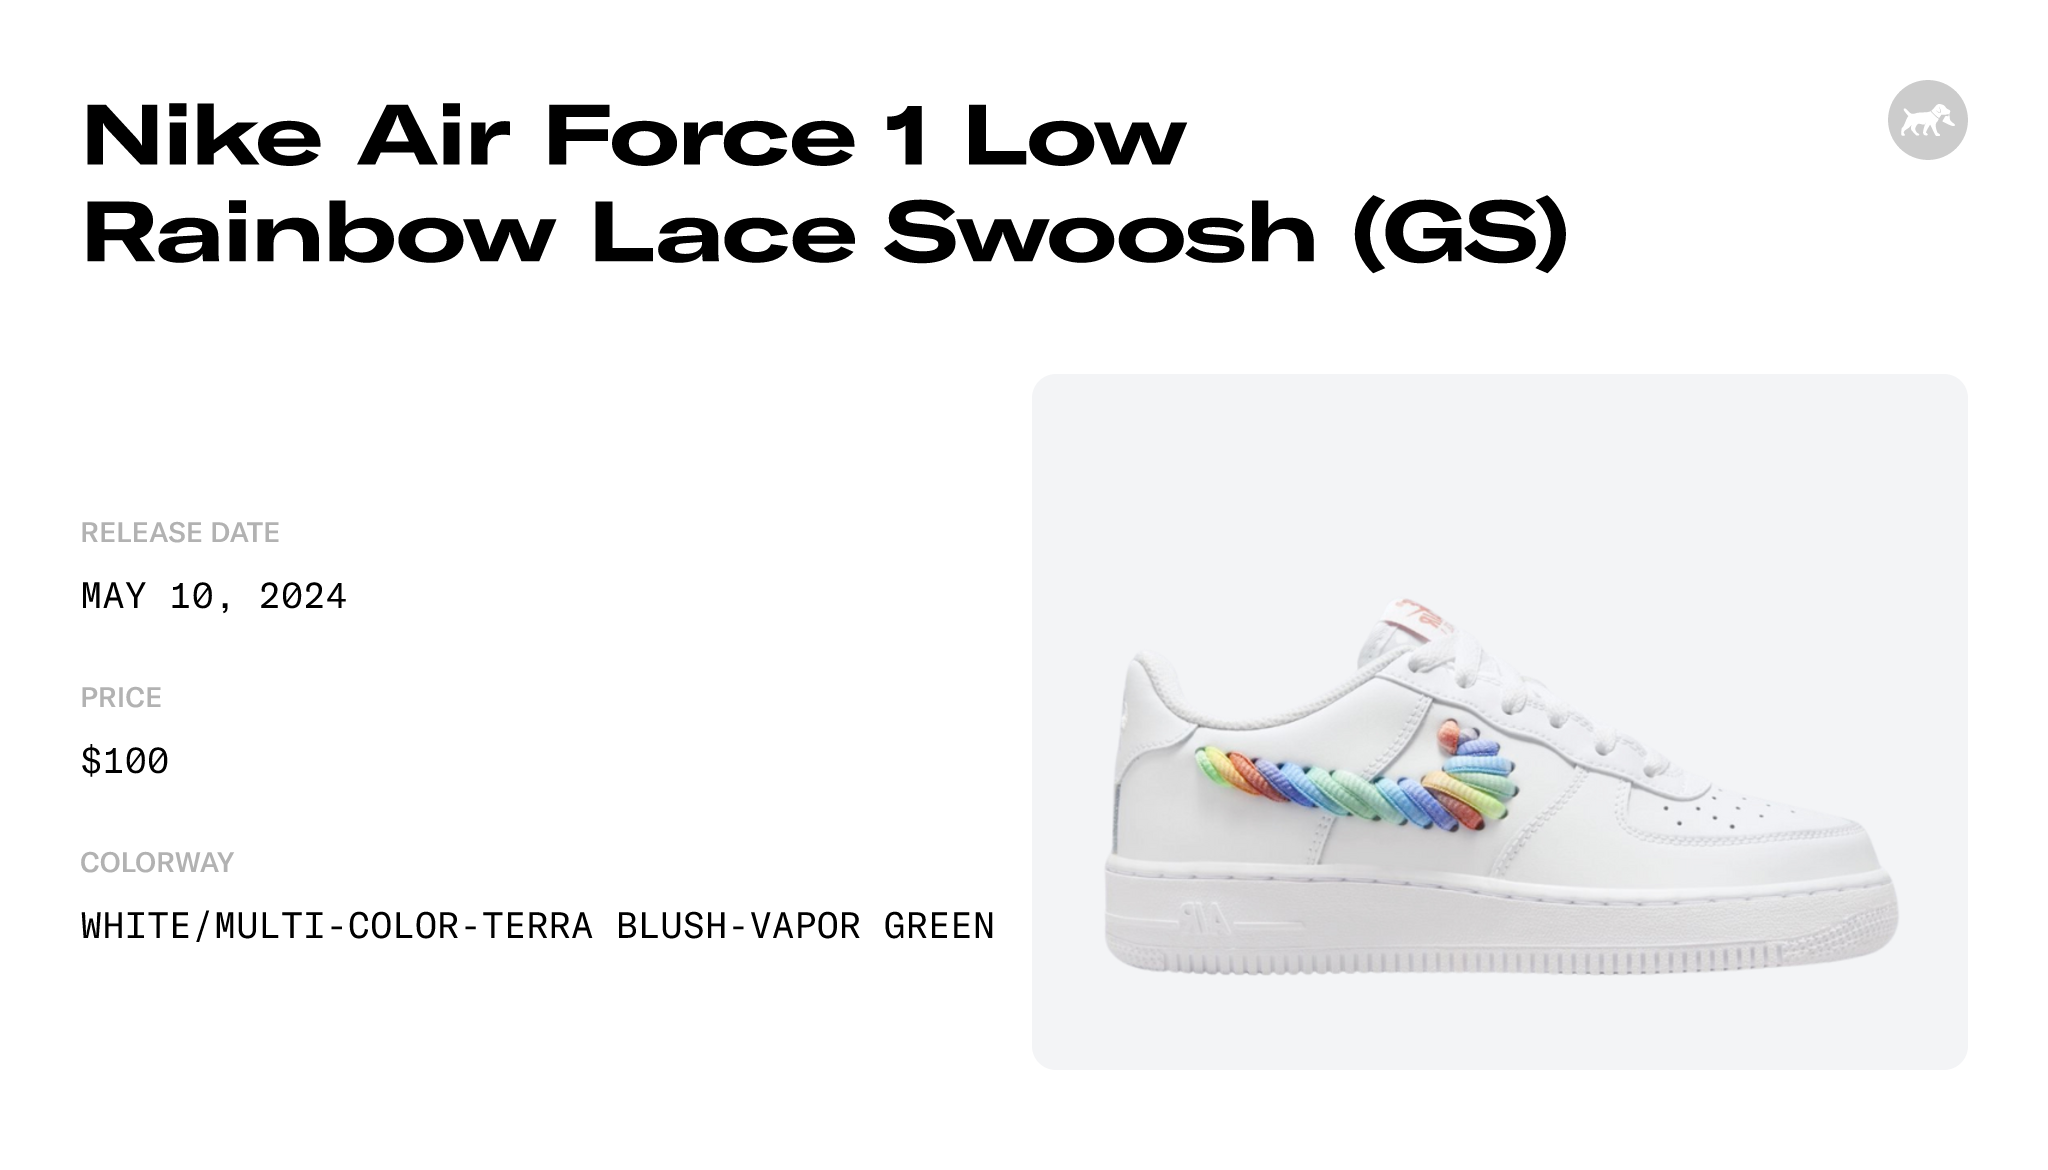 Nike Air Force 1 Low Rainbow Lace Swoosh (GS) - FQ4948-100 Raffles and  Release Date